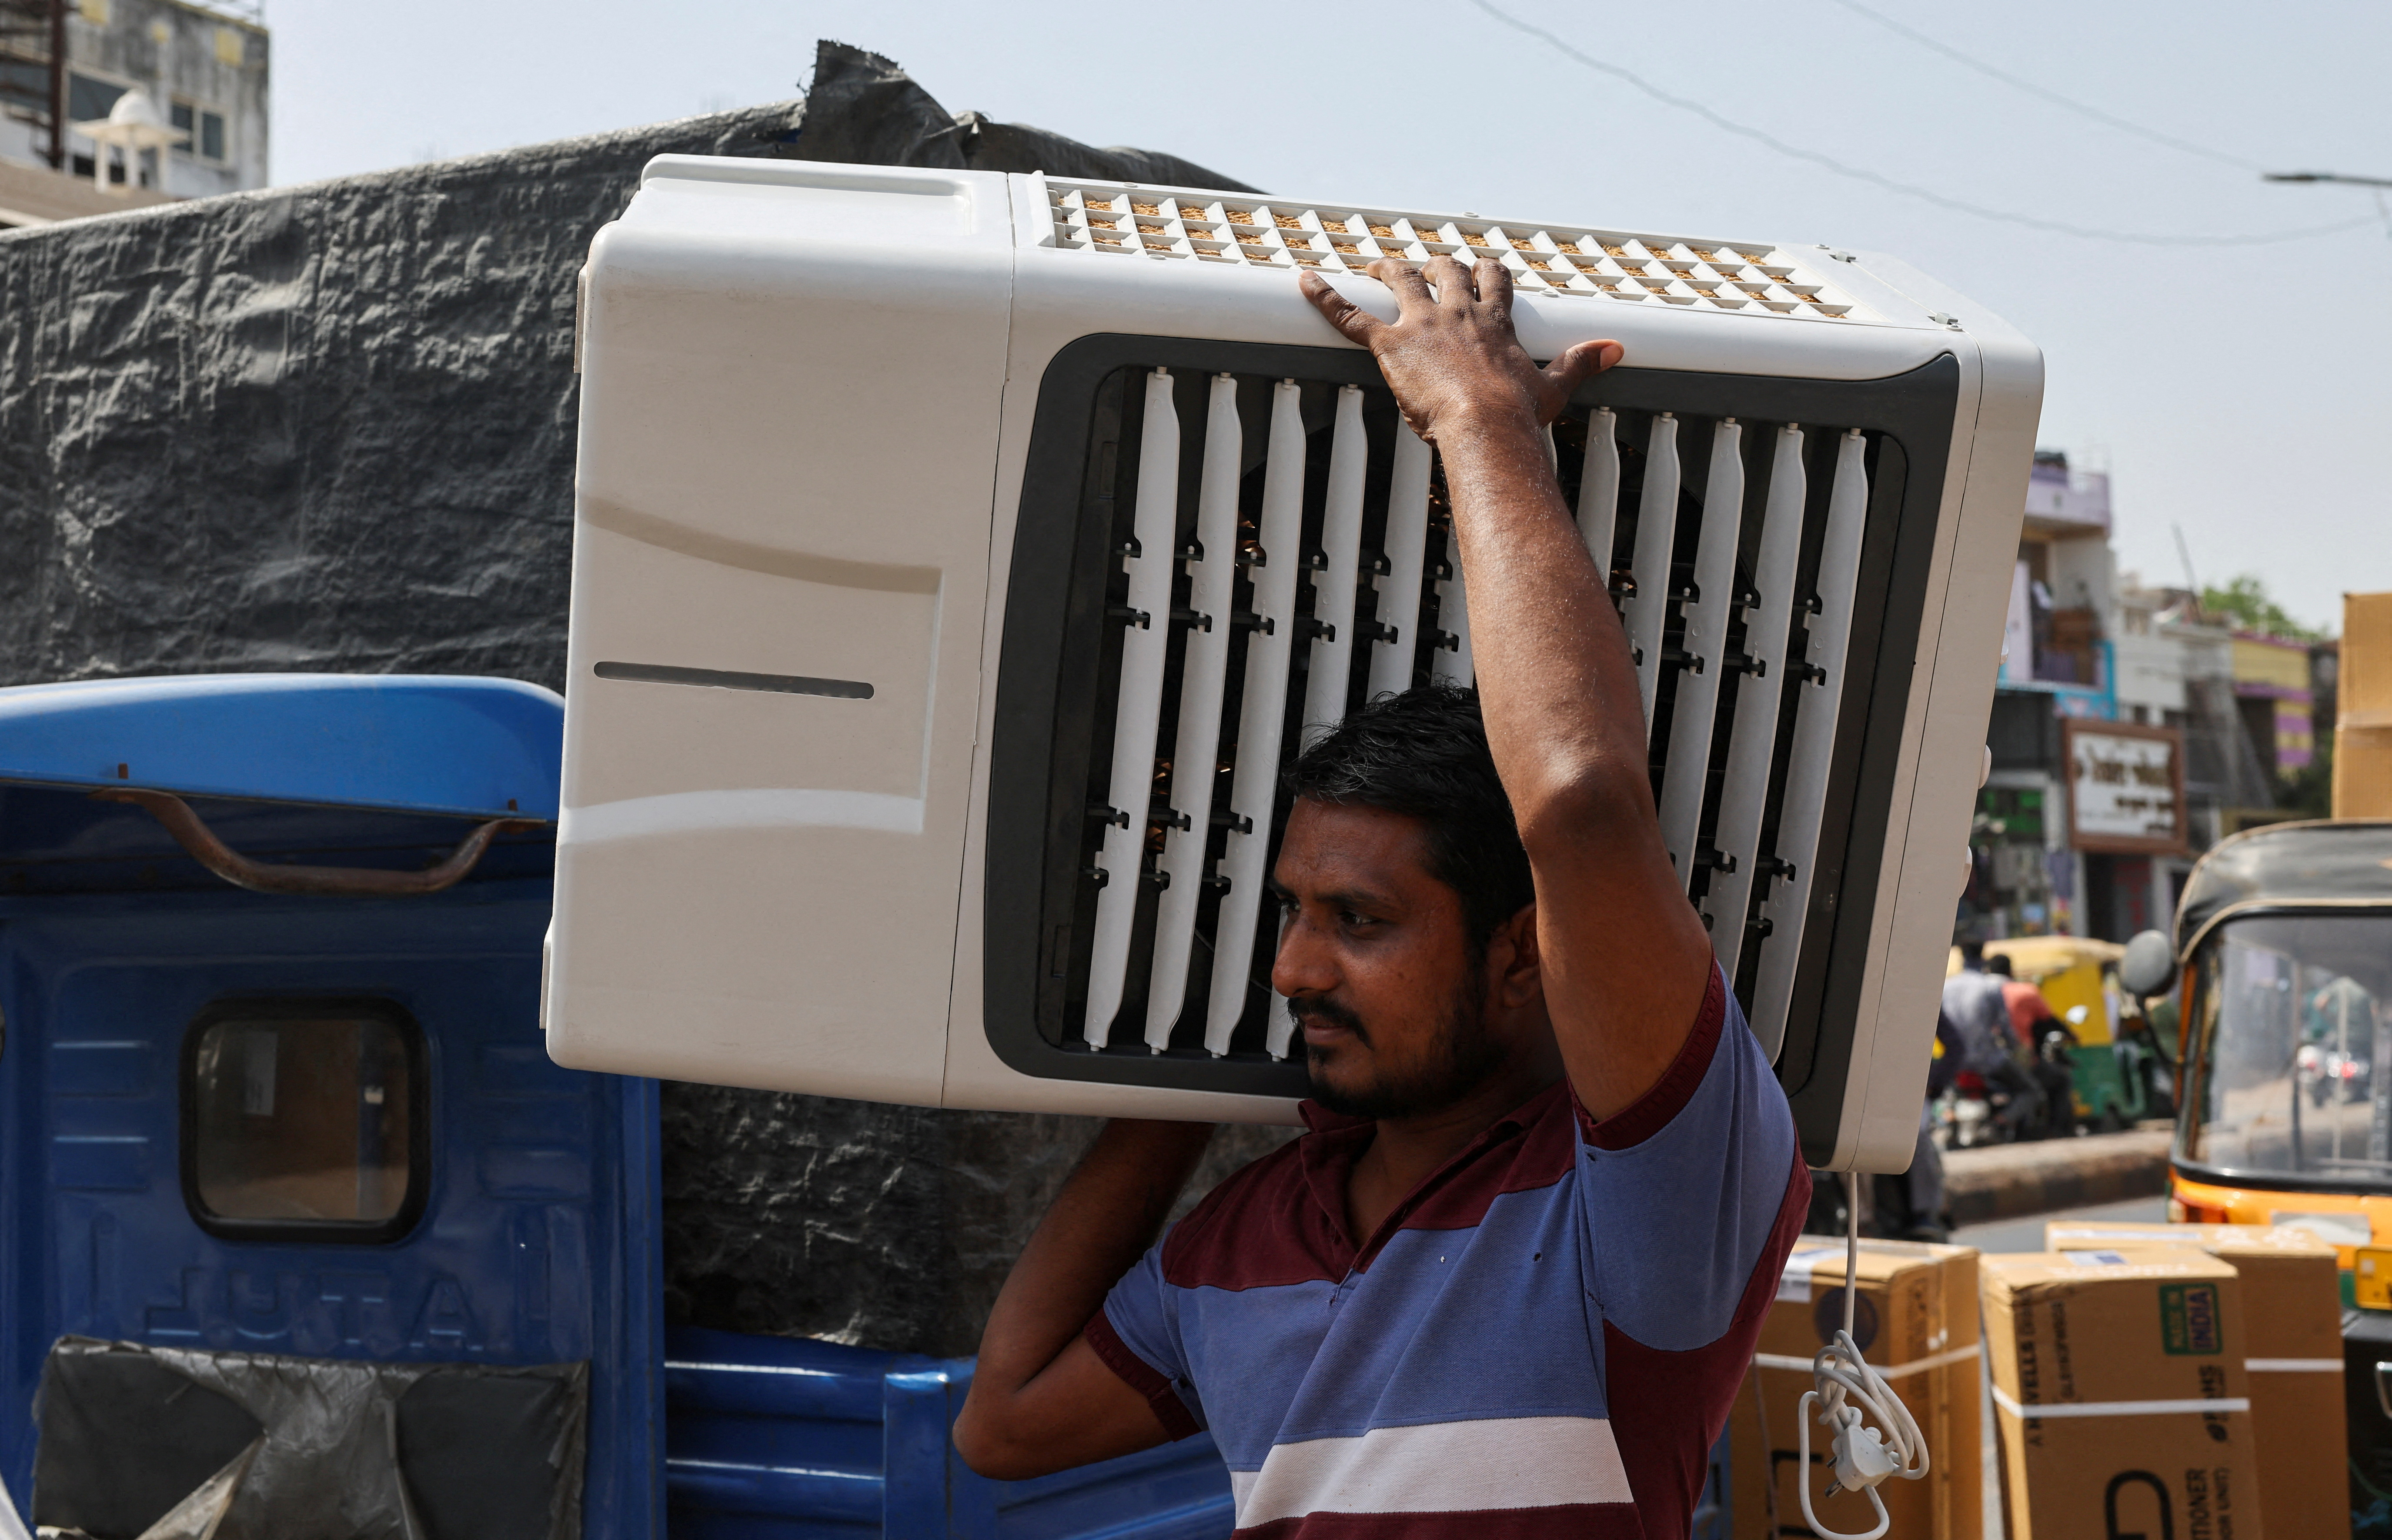 A worker carries an air cooler for delivery to a customer during the heat wave in Ahmedabad